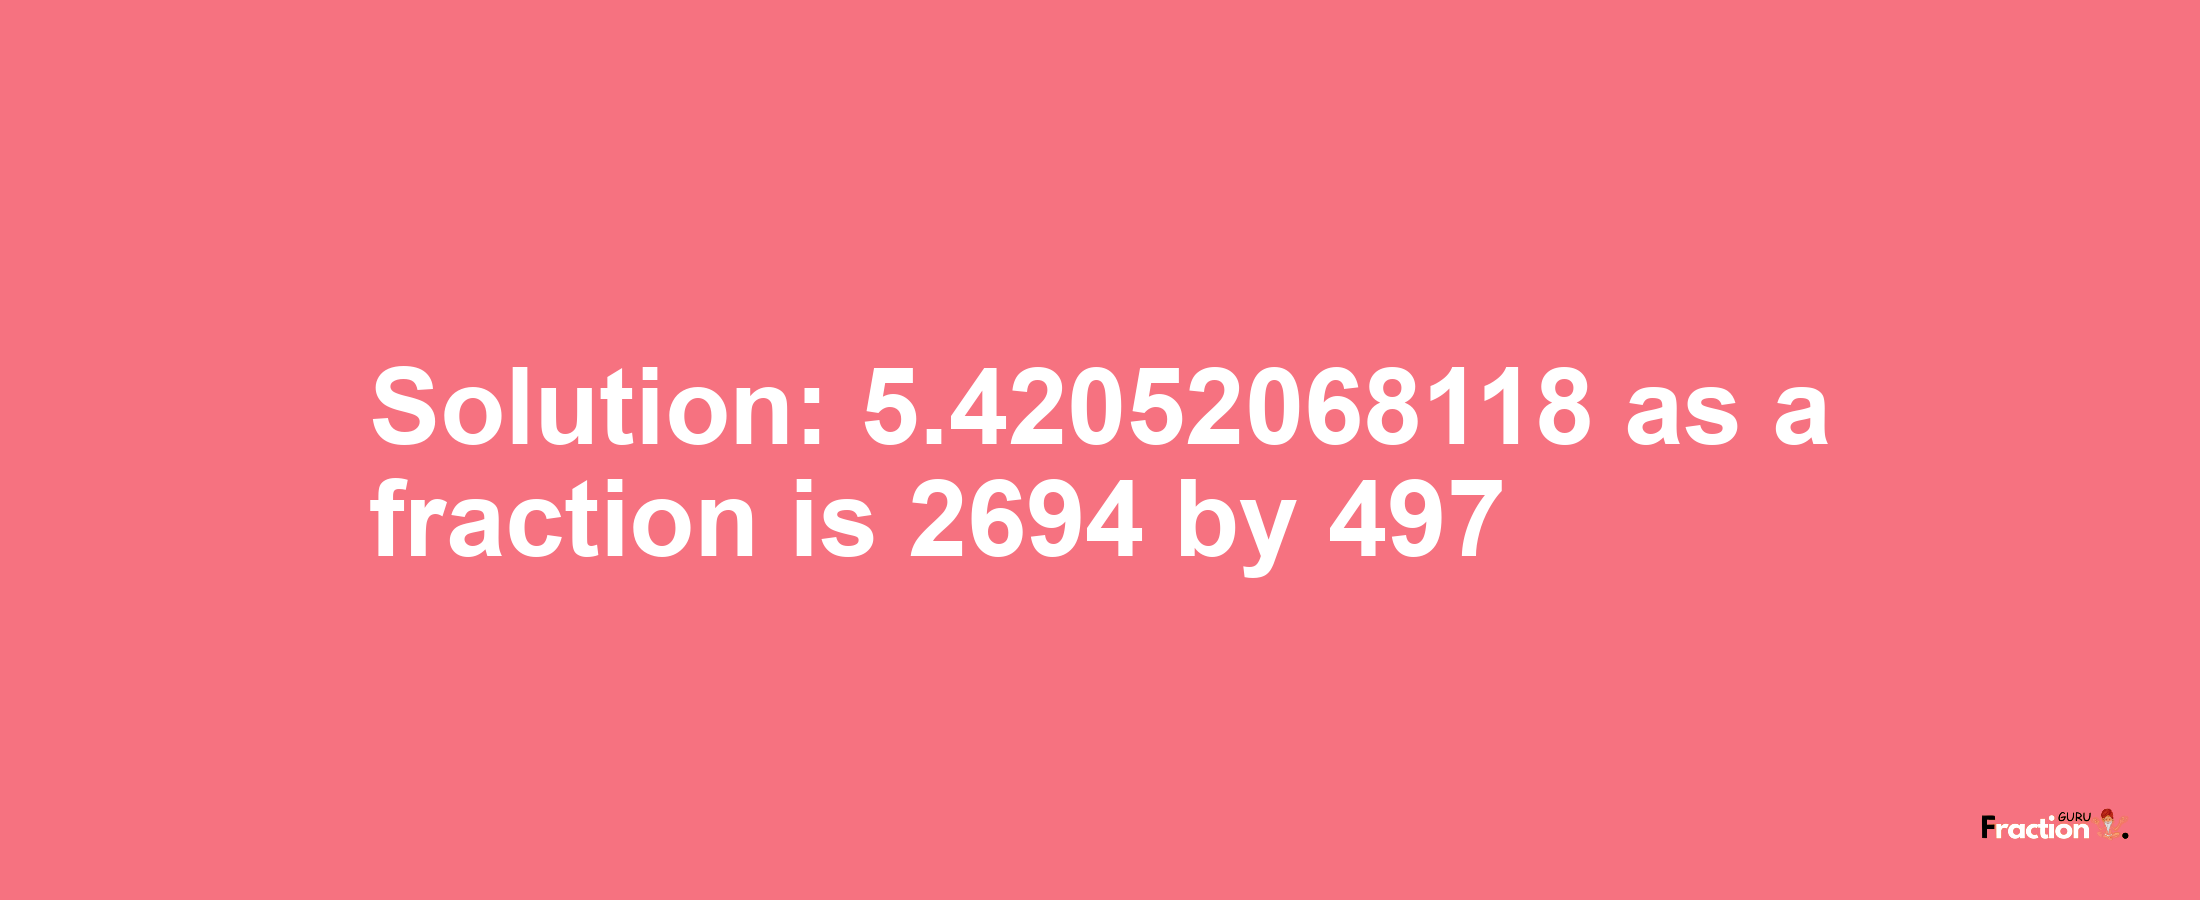 Solution:5.42052068118 as a fraction is 2694/497